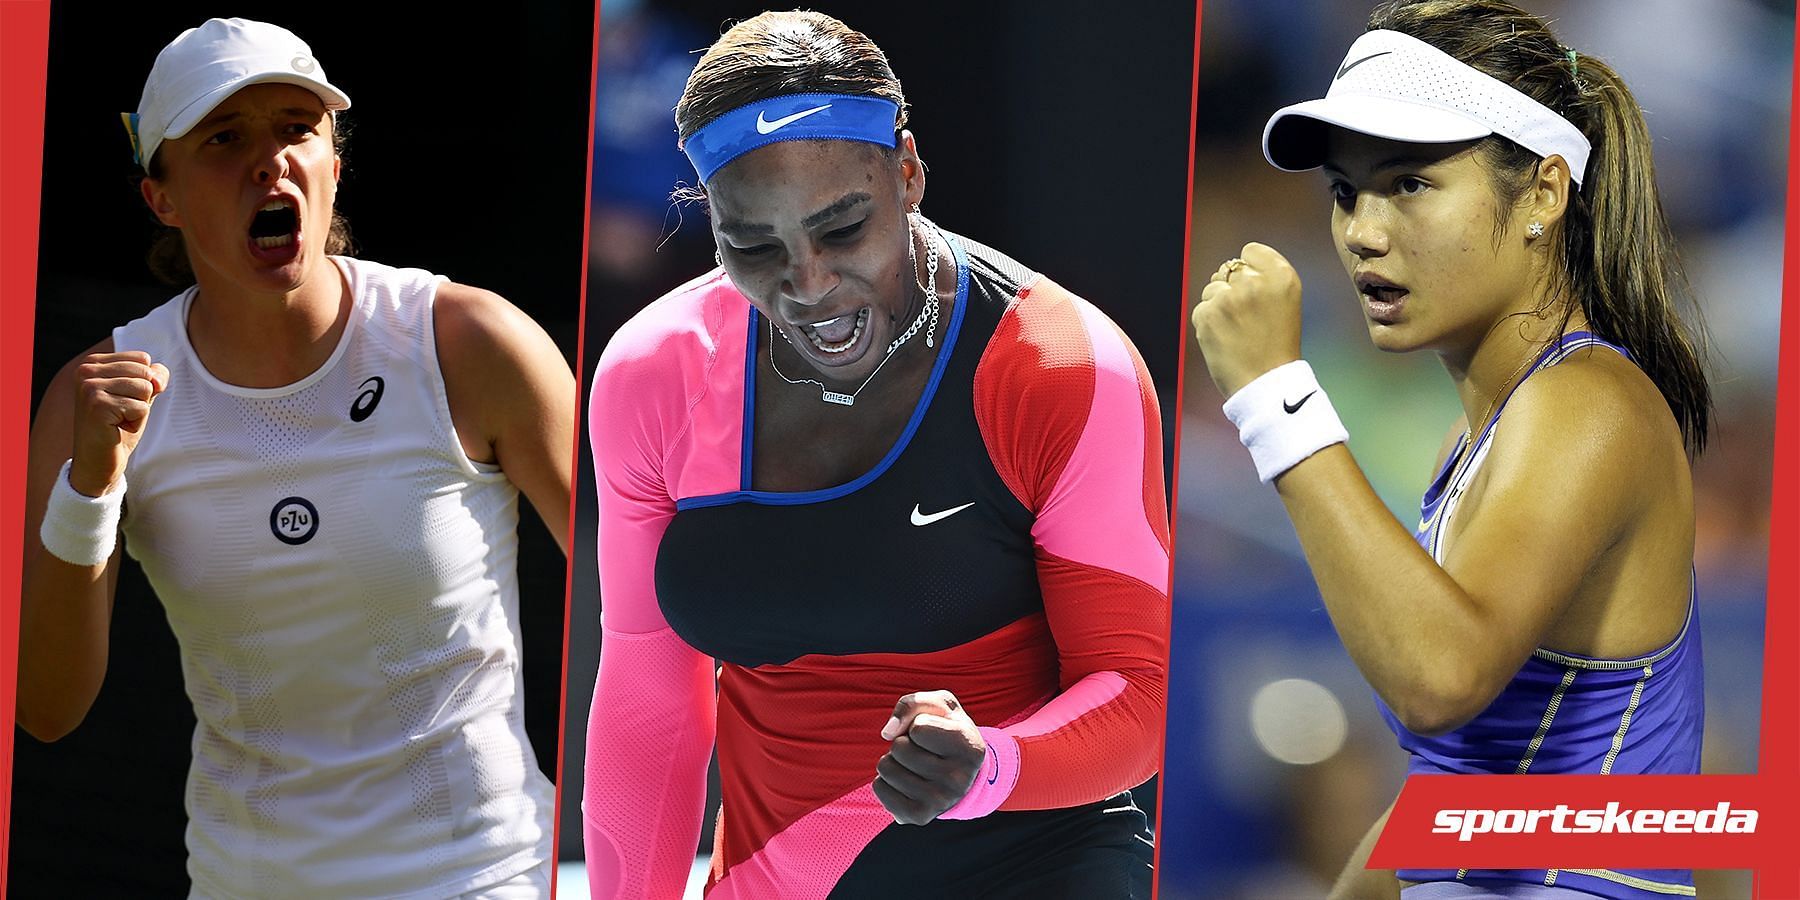 Fans get ready to watch Iga Swiatek, Serena Williams and Emma Raducano at the 2022 Canadian Open